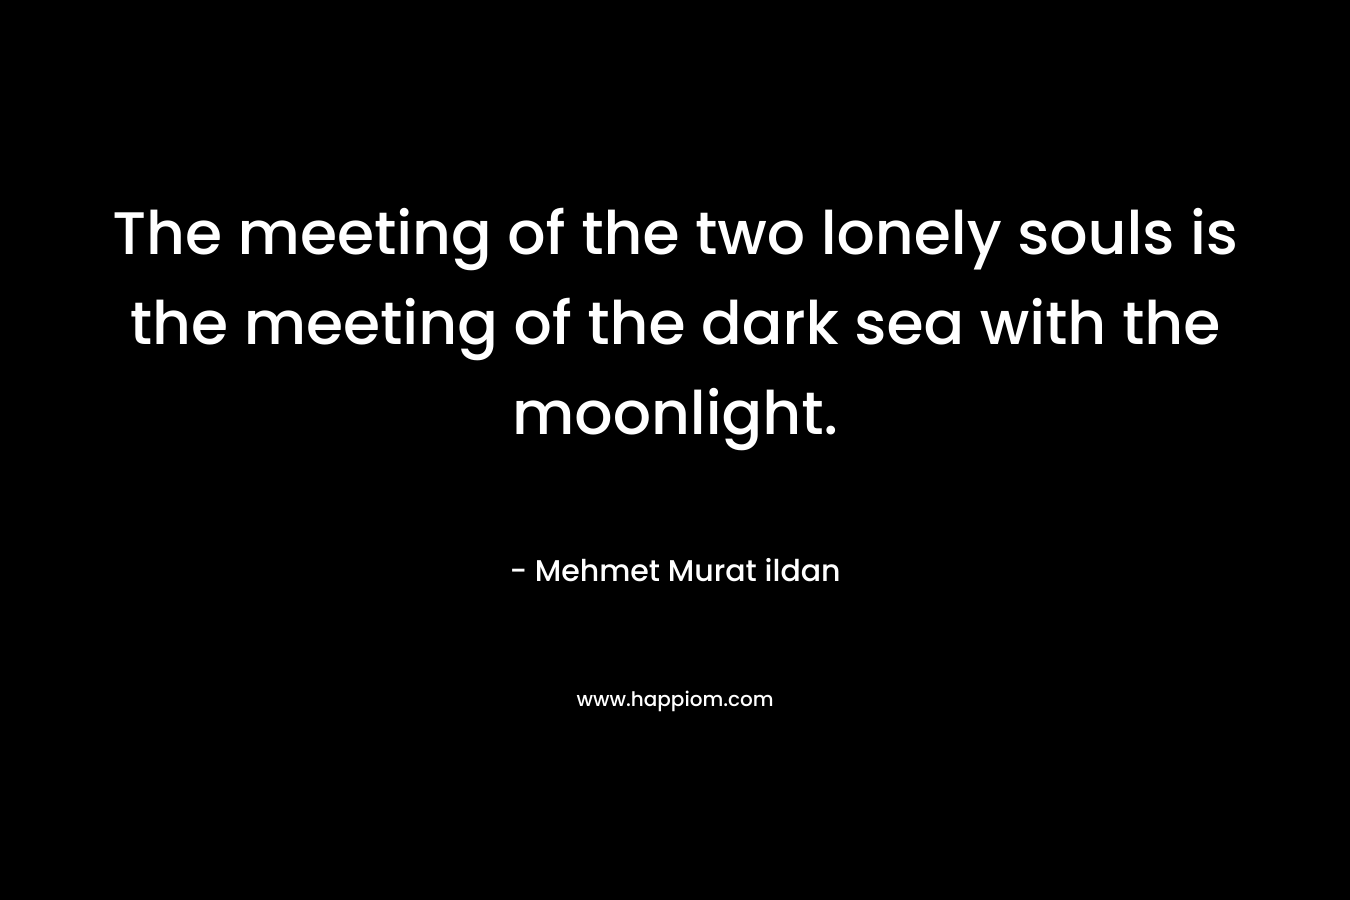 The meeting of the two lonely souls is the meeting of the dark sea with the moonlight.